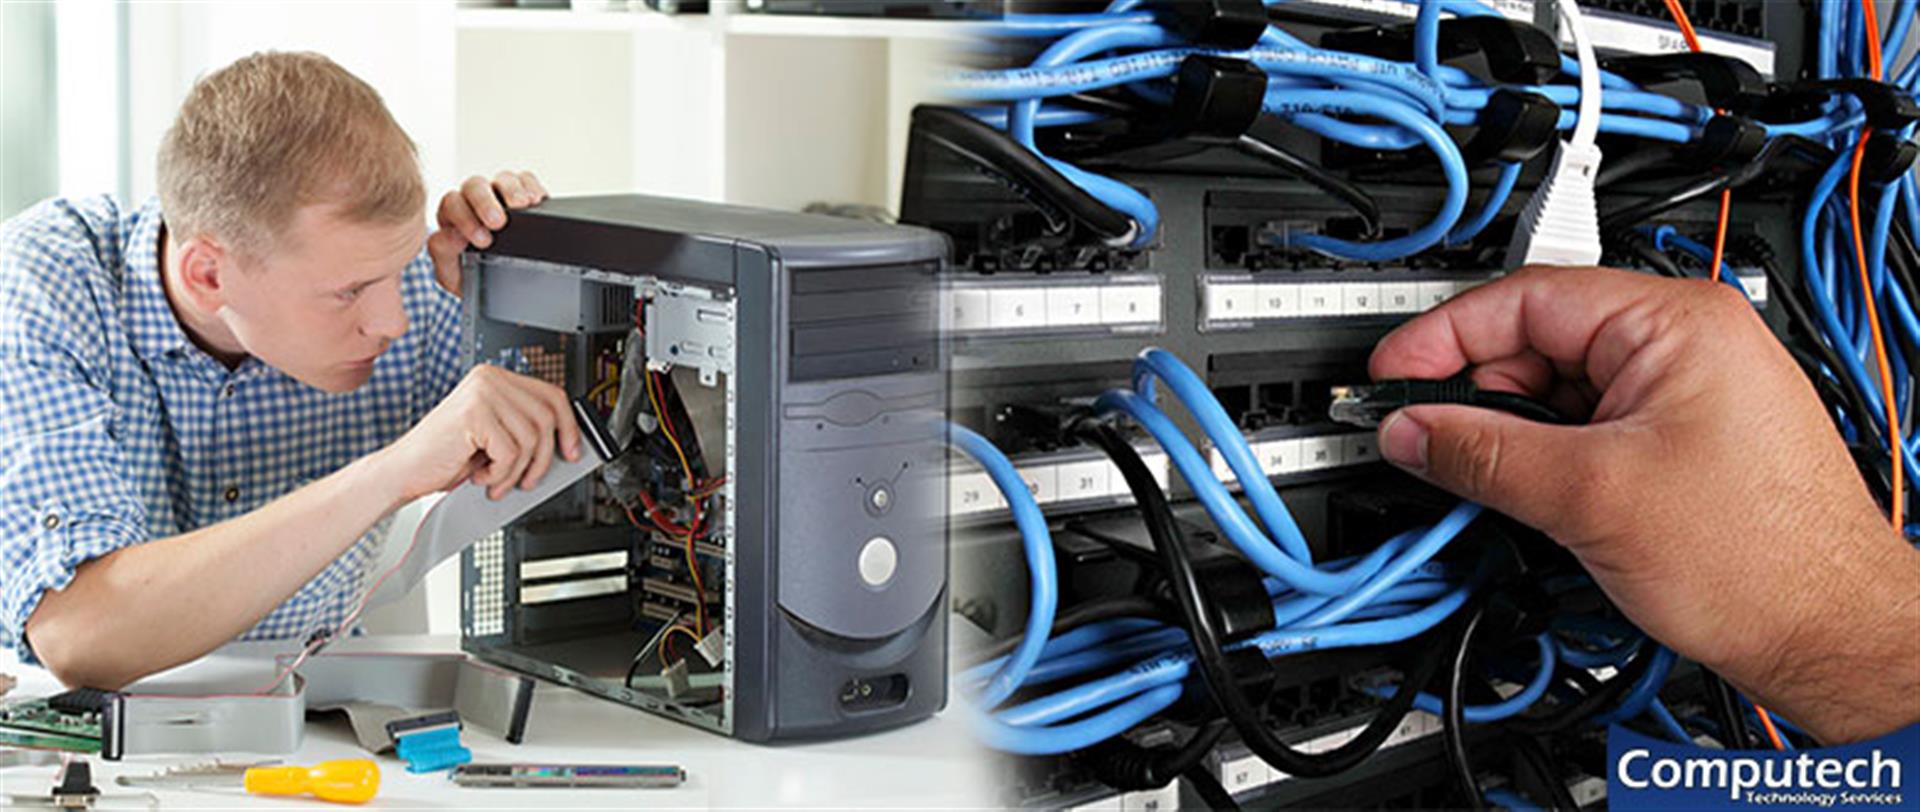 Prescott Valley Arizona Onsite PC & Printer Repair, Network, Voice and High Speed Data Low Voltage Cabling Services